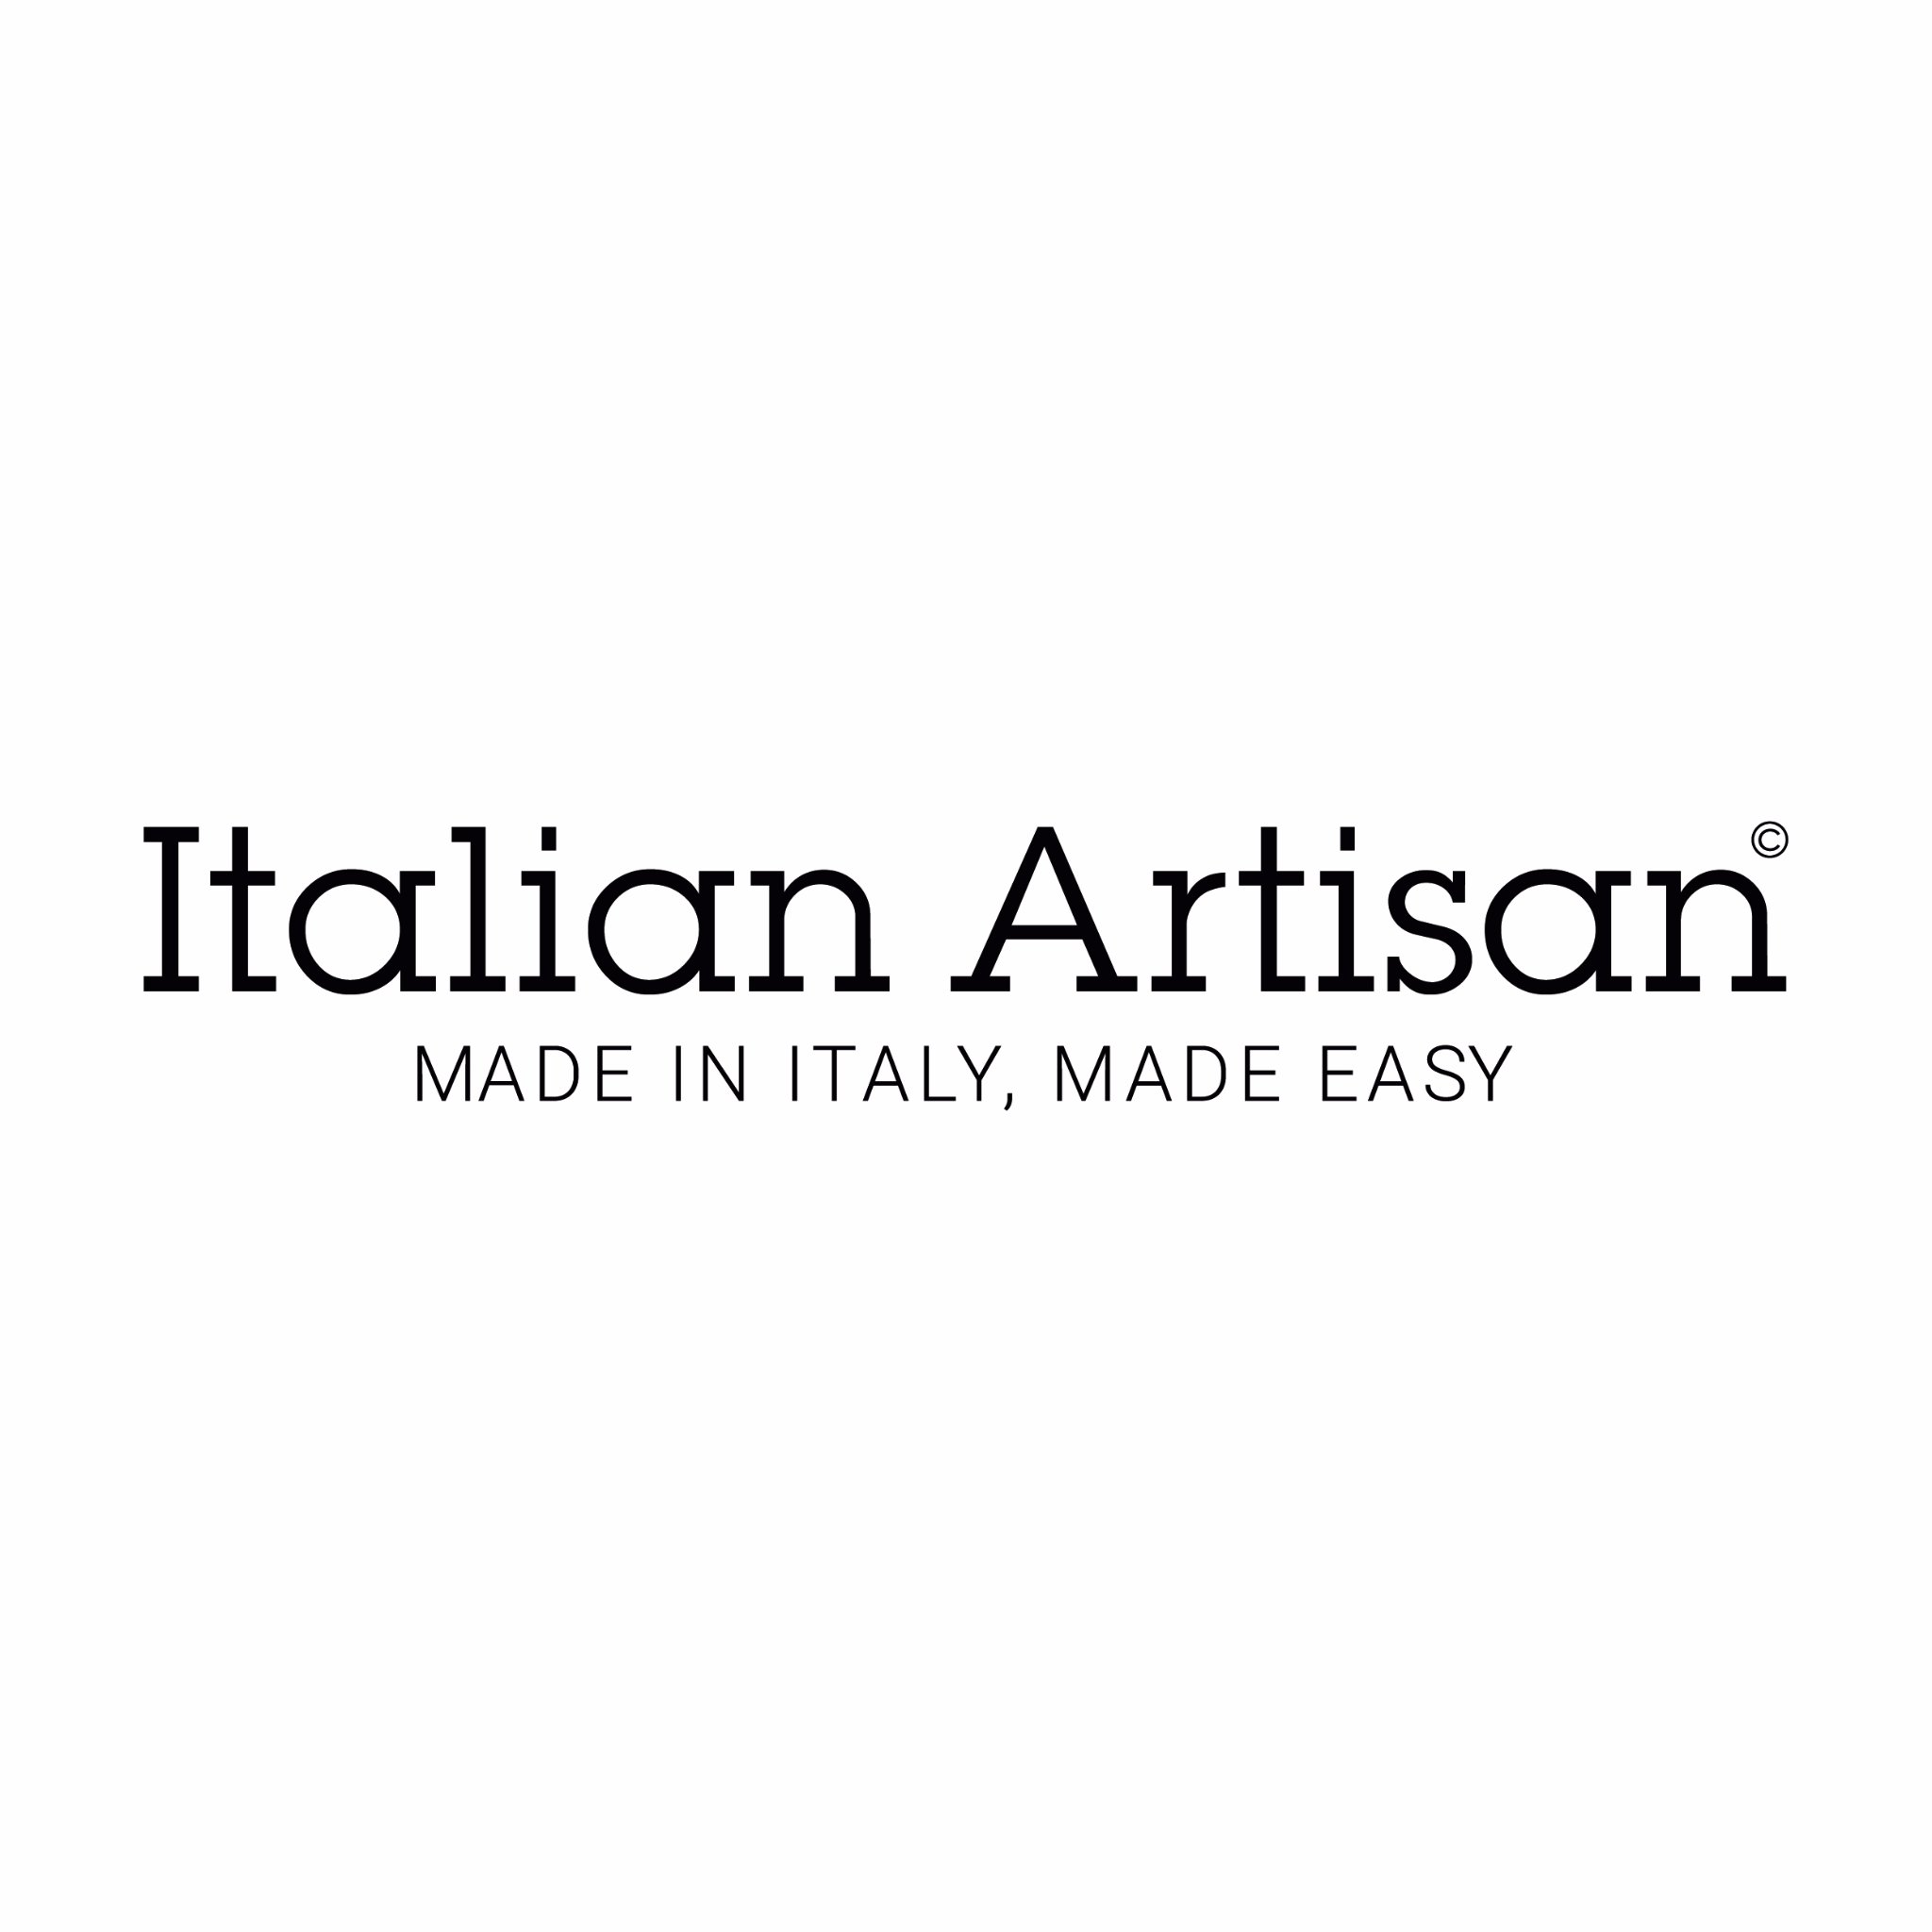 We connect hard-to-get Italian artisans specialized in shoes, accessories and clothing with emerging designers and international premium buyers.